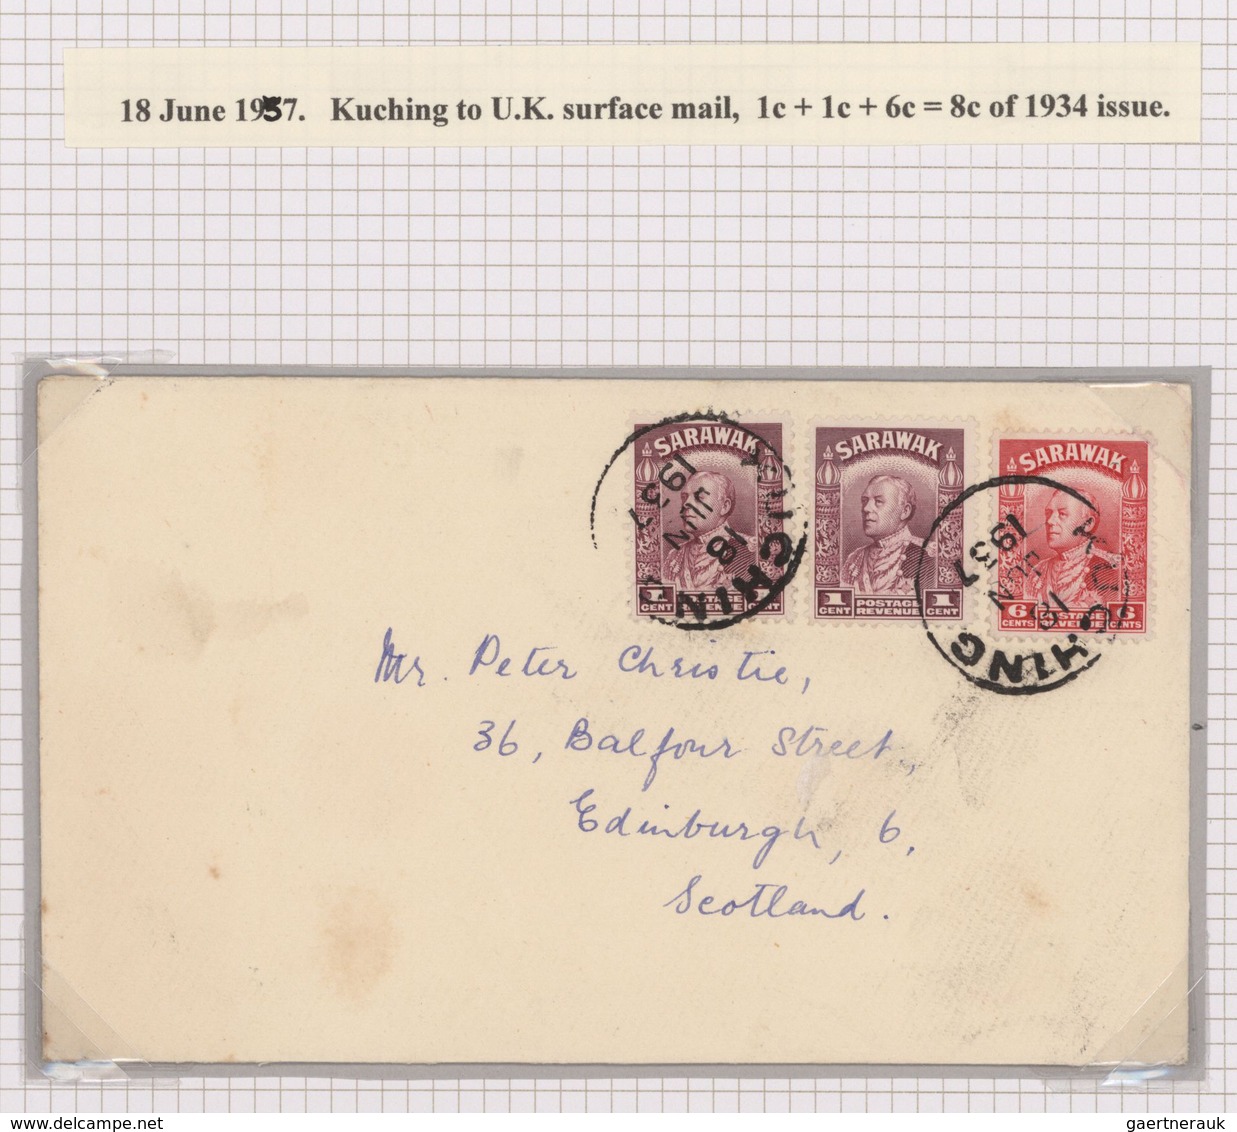 Malaiische Staaten - Sarawak: 1934, seven covers with different frankings to Europe. As there are fo